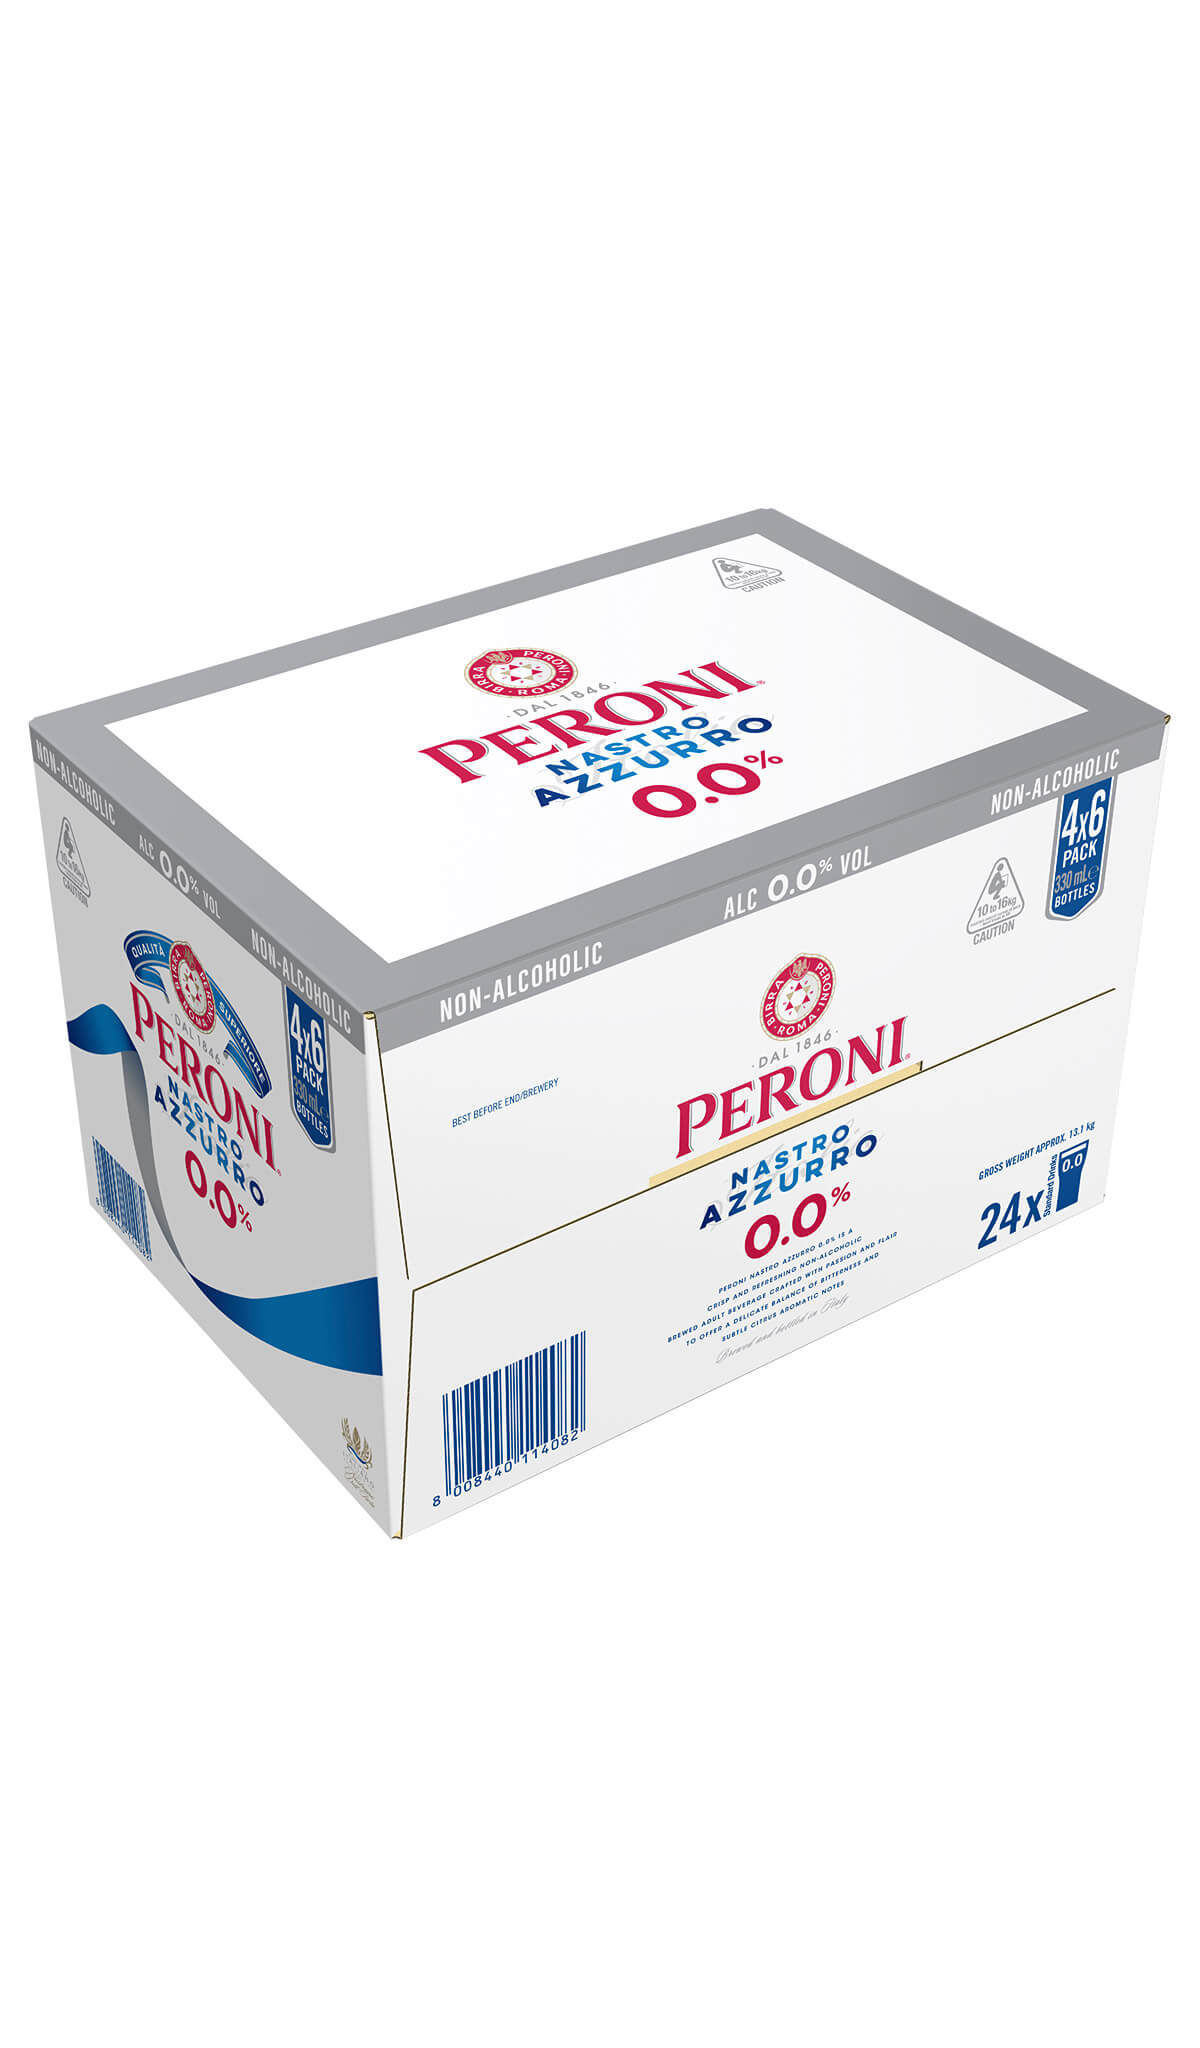 Find out more, explore the range and purchase Peroni Nastro Azzurro 0.0% zero alcohol beer online at Wine Sellers Direct - Australia's independent liquor specialists.